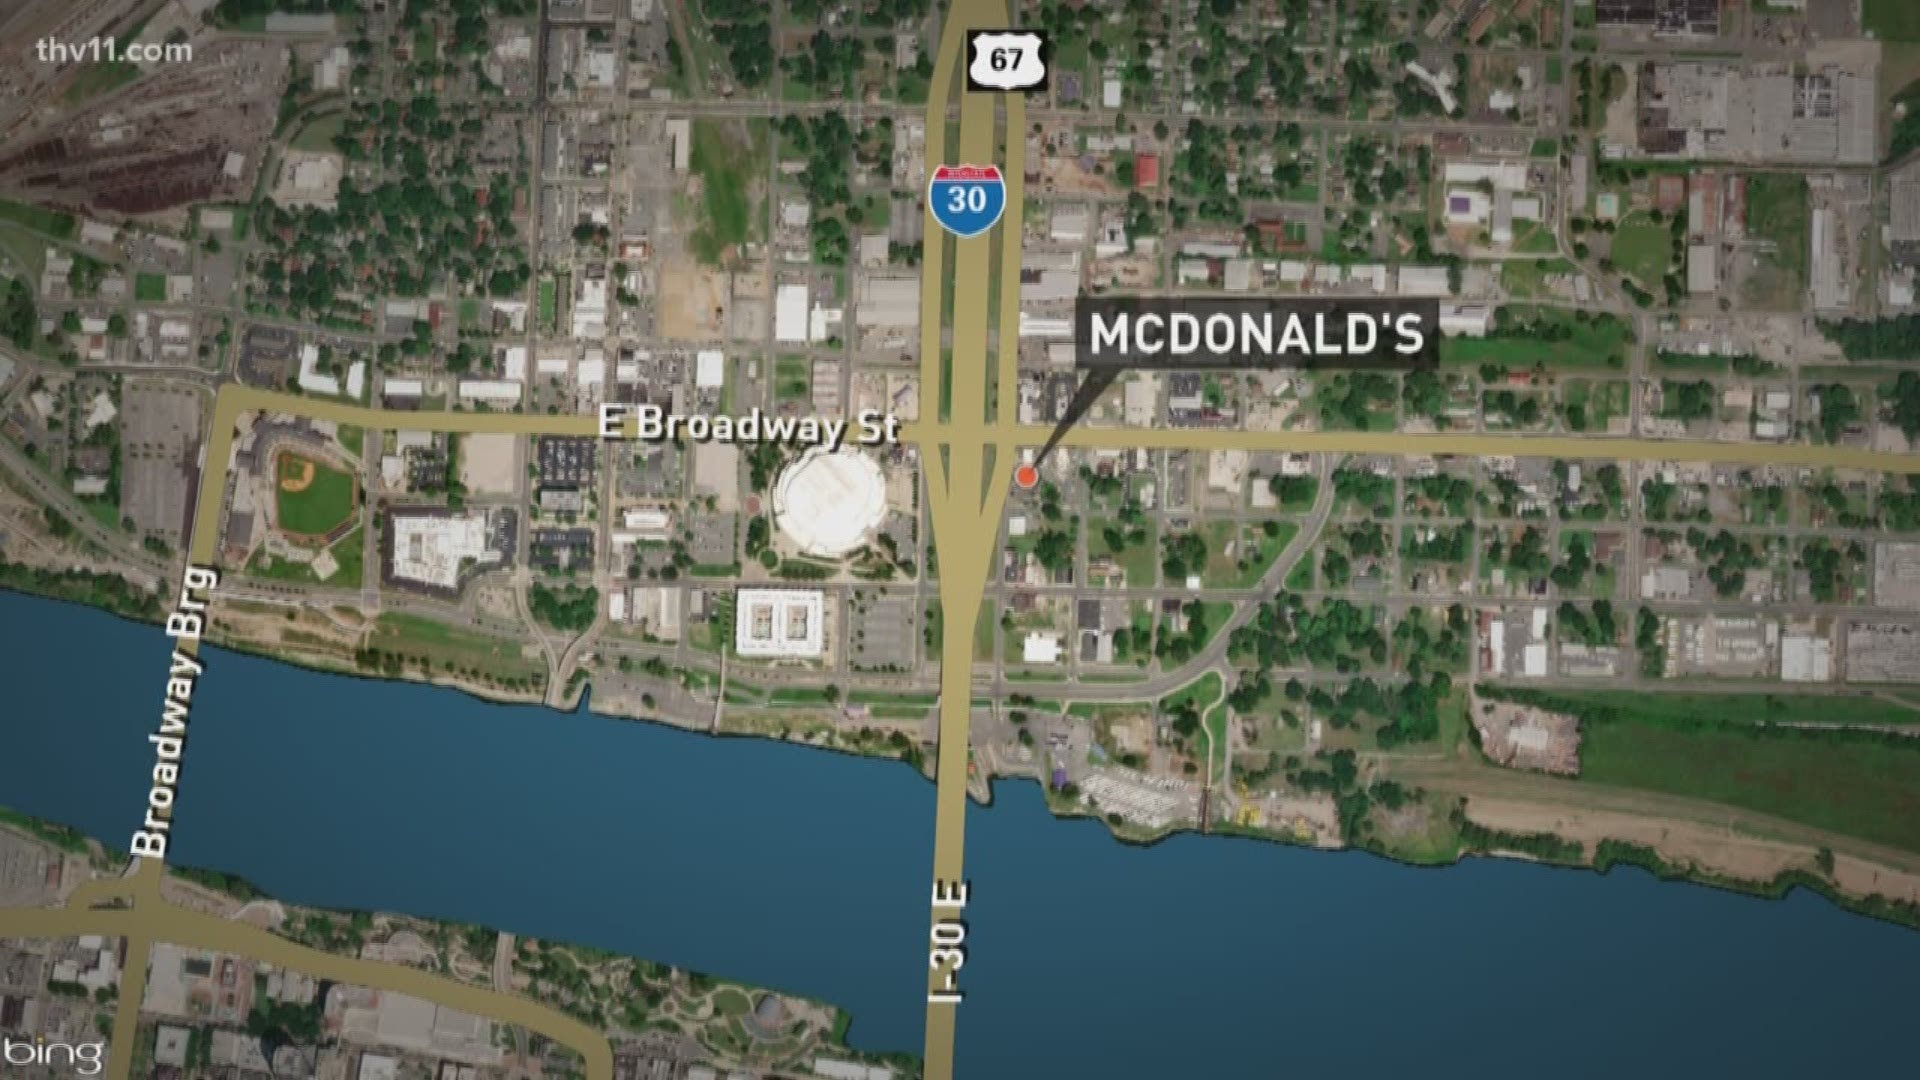 In North Little Rock, police are investigating a former McDonald's employee who, they say, threw hot grease on a customer's face.